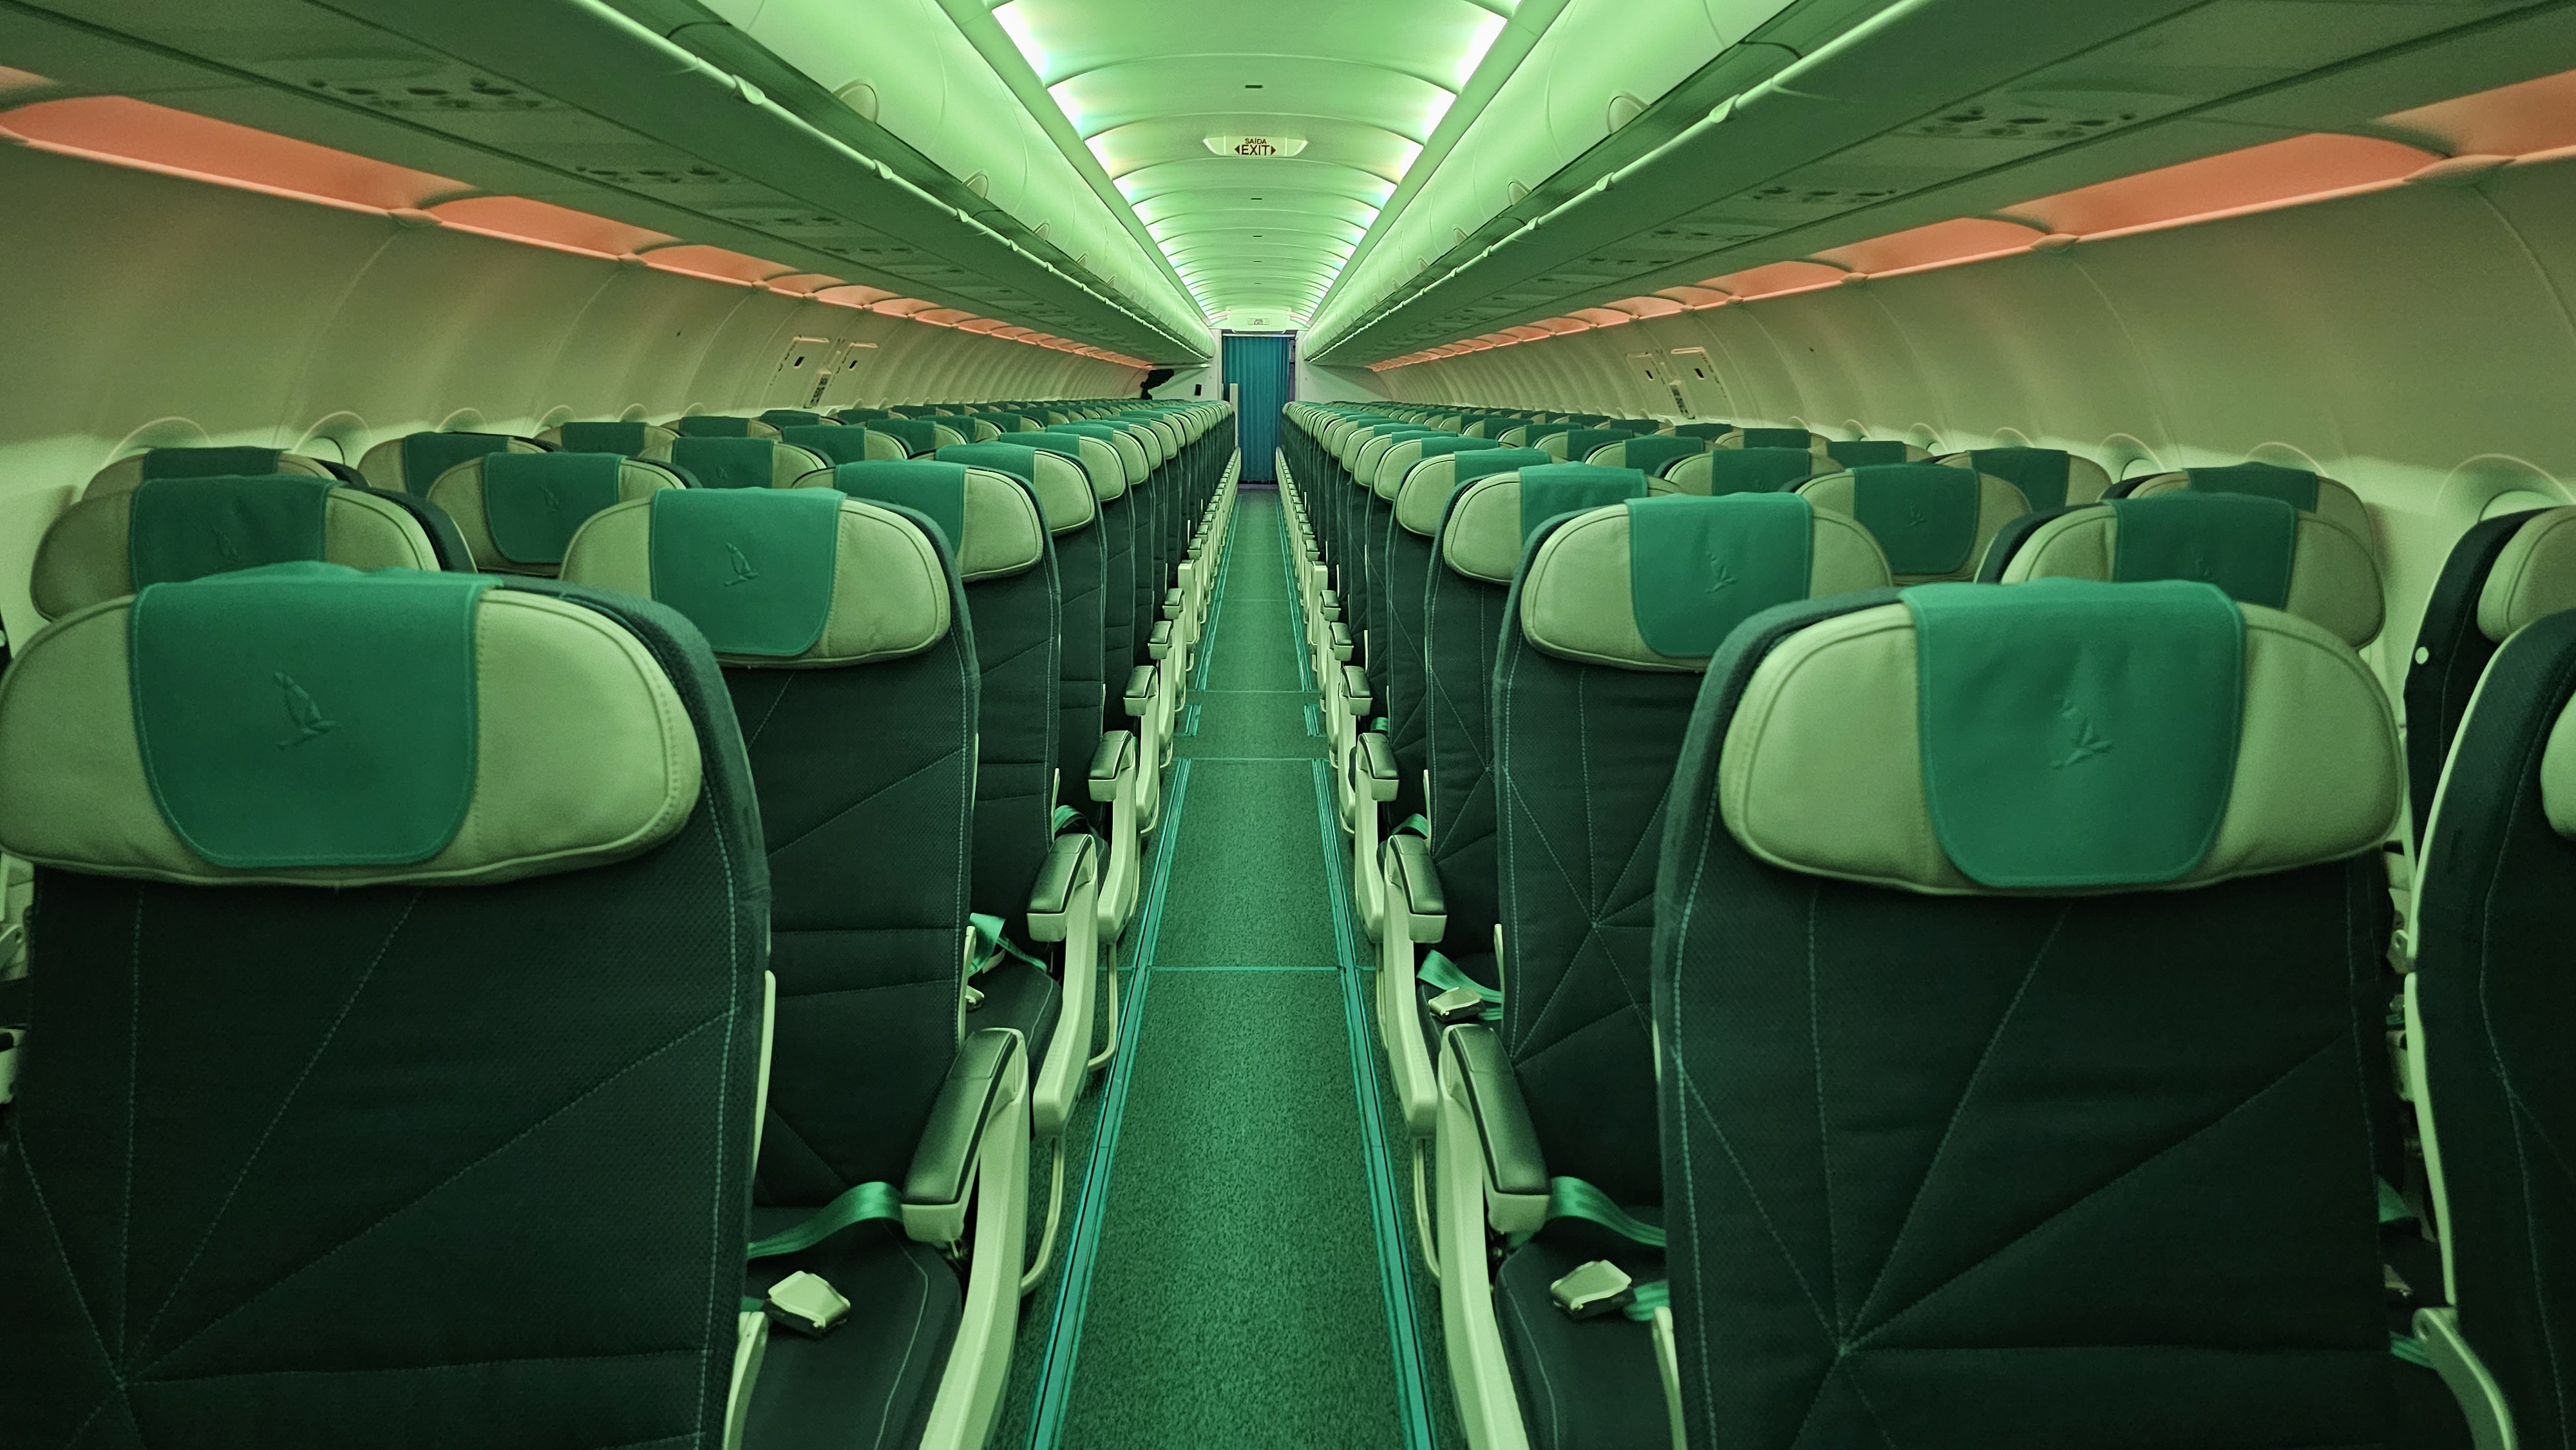 STG Aerospace partners with Azores Airlines to provide unique cabin lighting experience